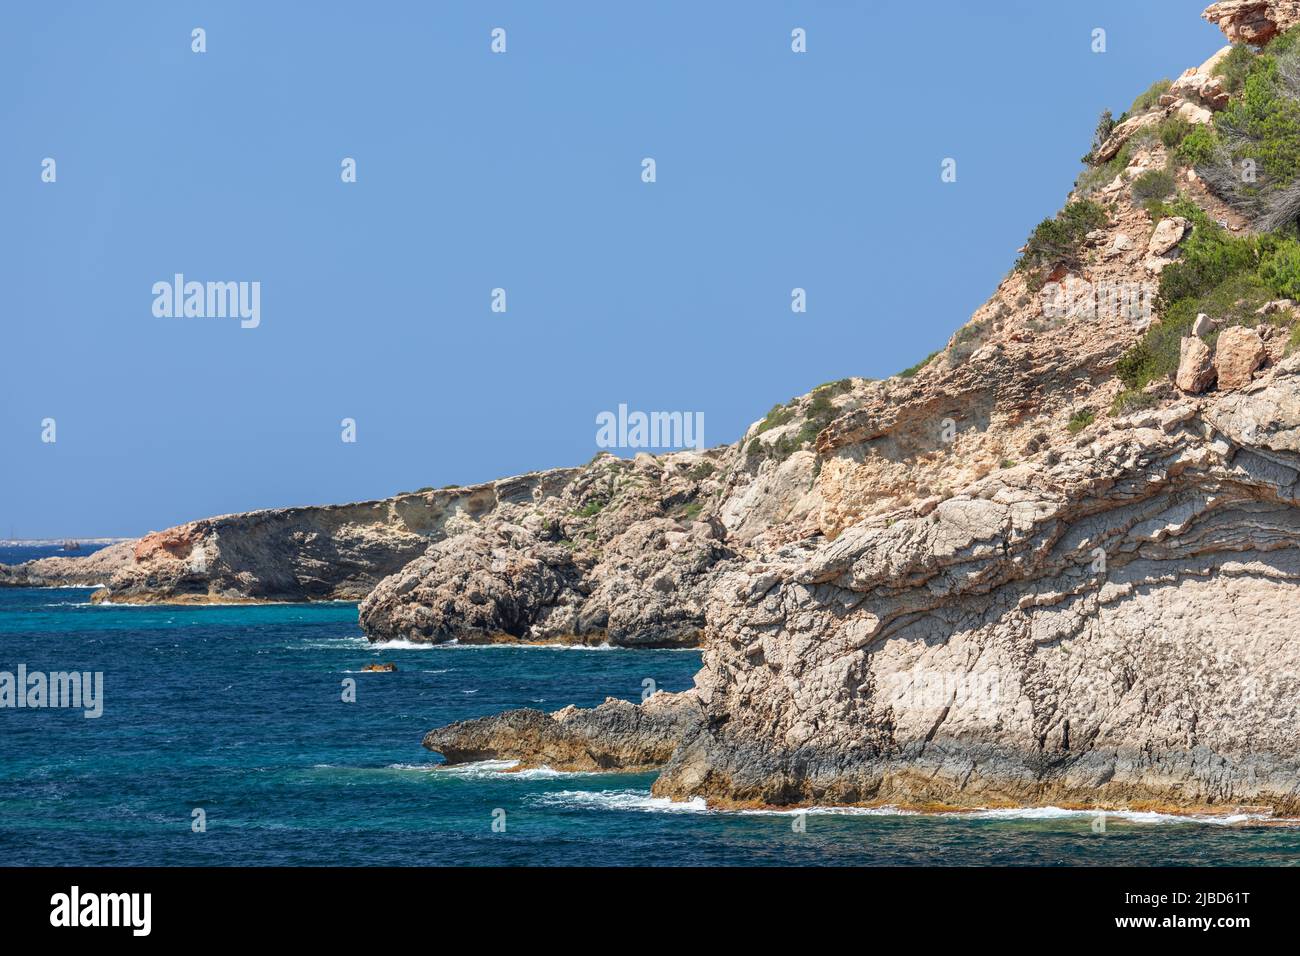 Morning view of the sea and sun-bleached coastal cliffs of Ibiza island under clear, pale blue sky without a single cloud, Balearic Islands, Spain Stock Photo